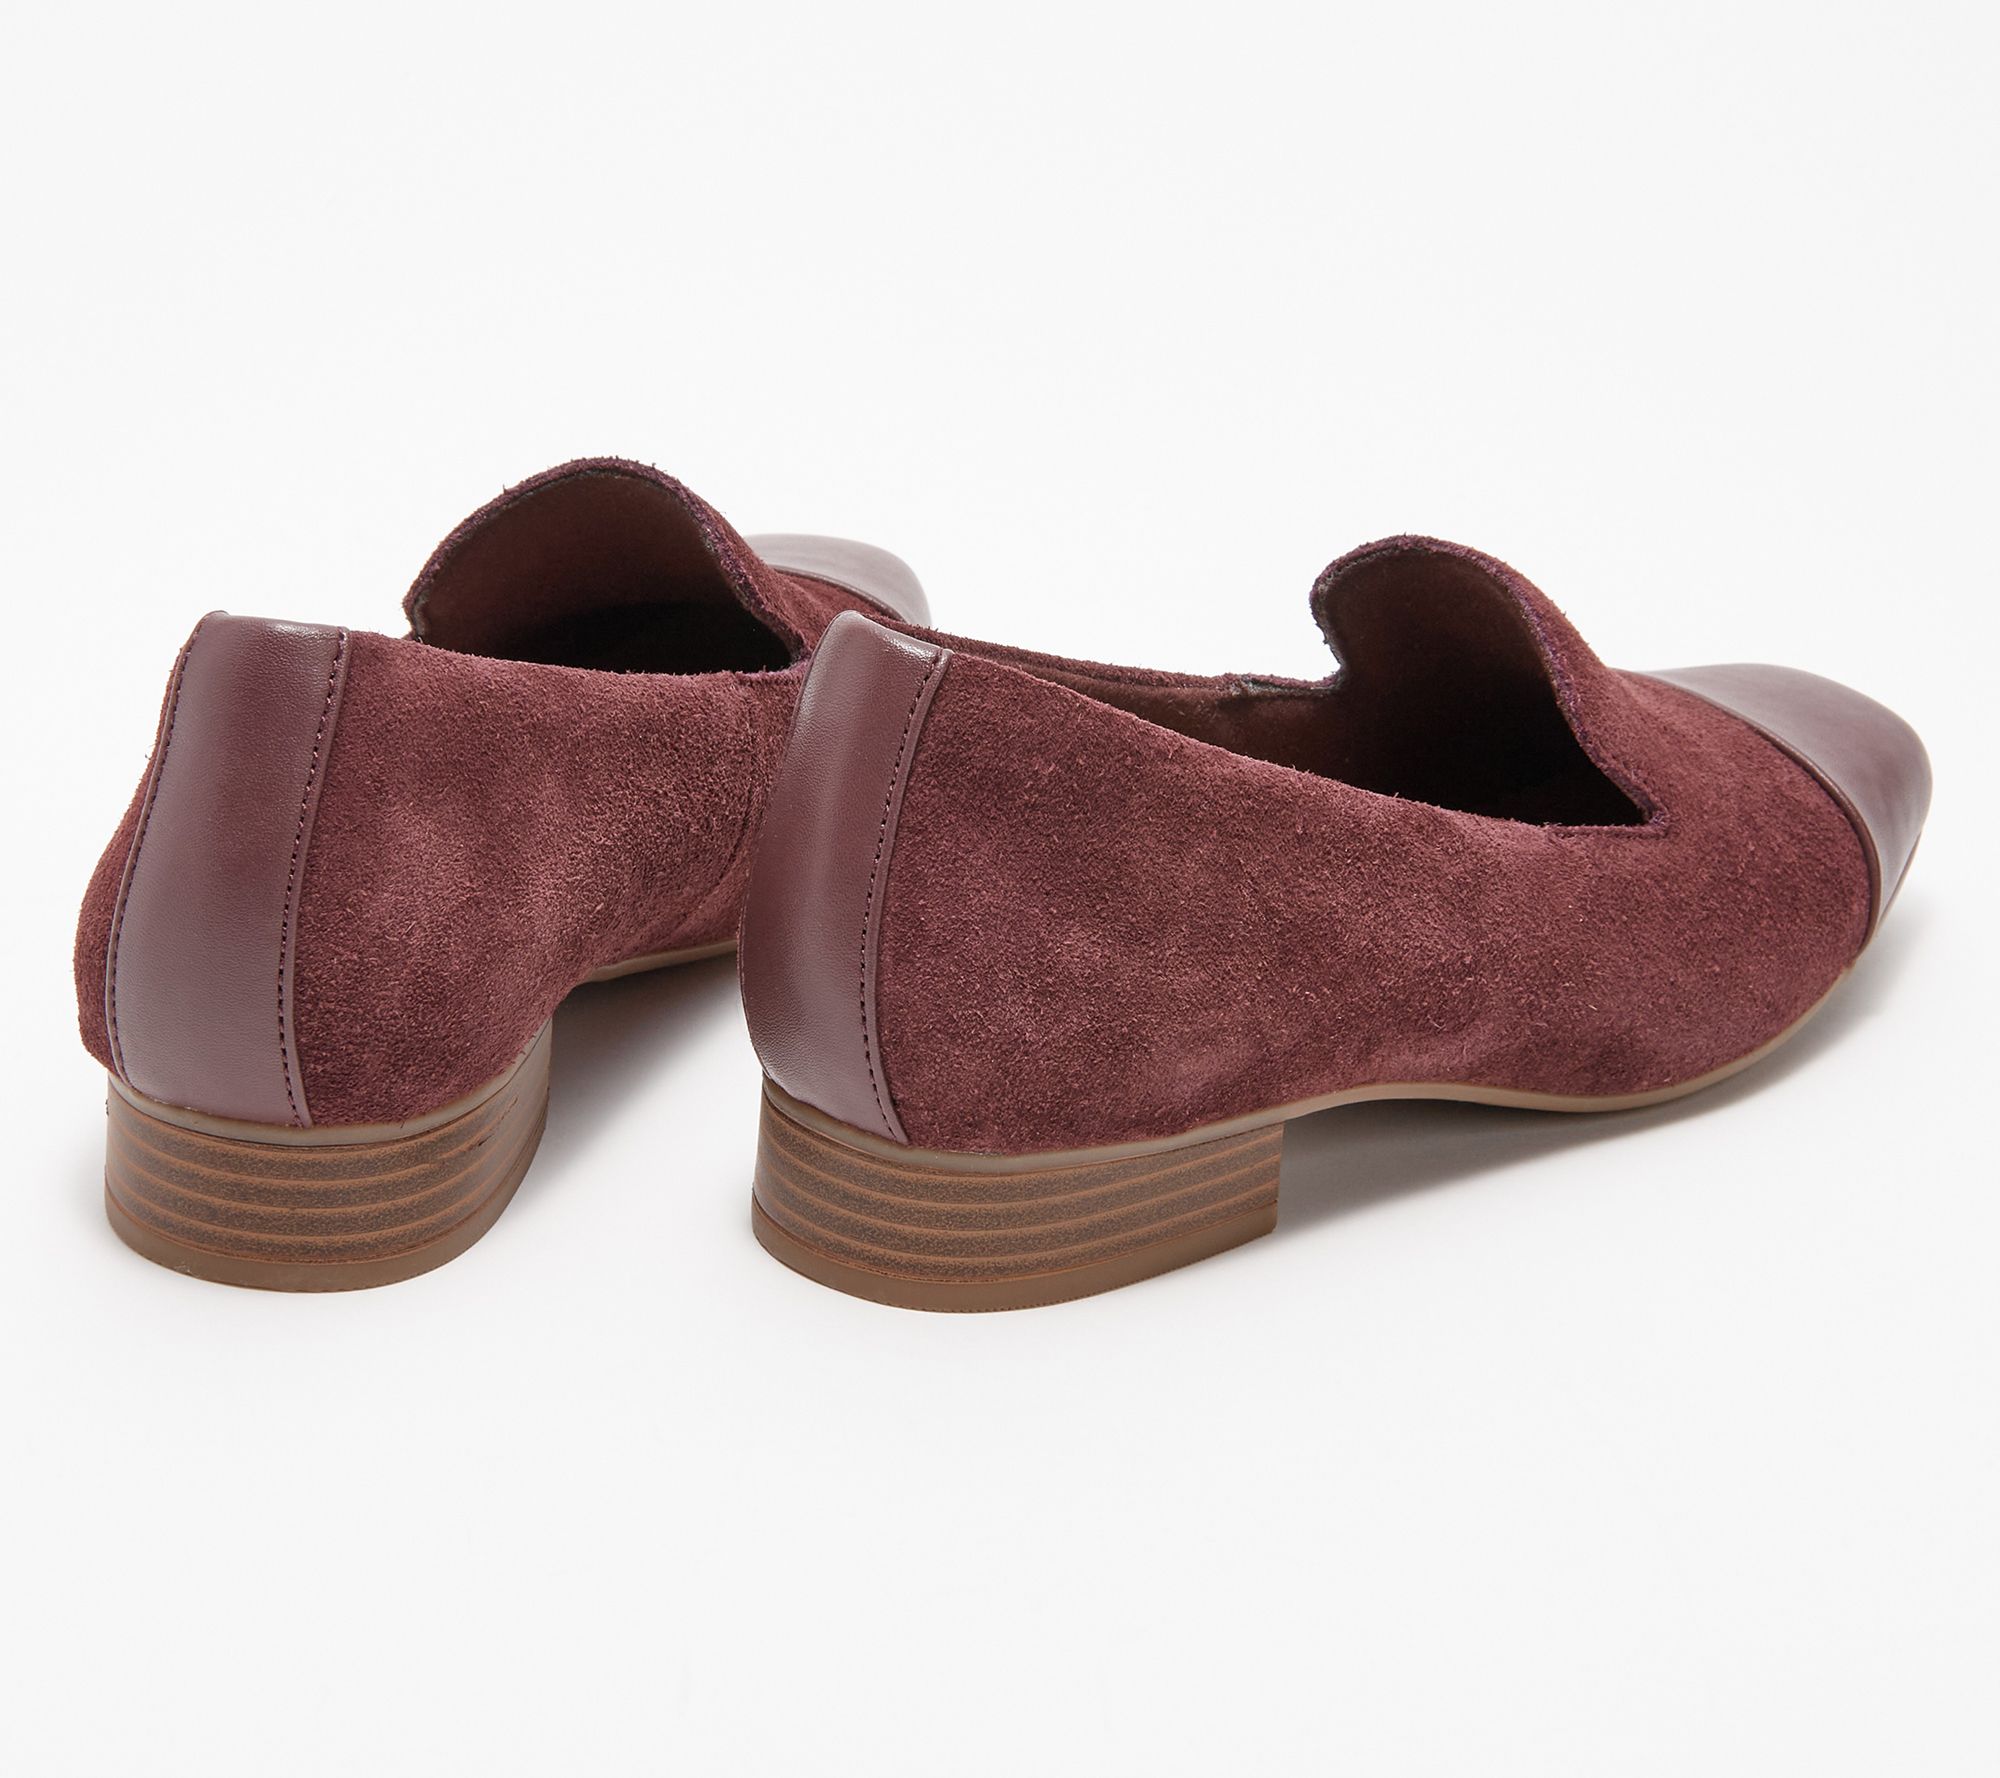 Clarks Collection Suede Cap-Toe Loafers - Tilmont Step - QVC.com